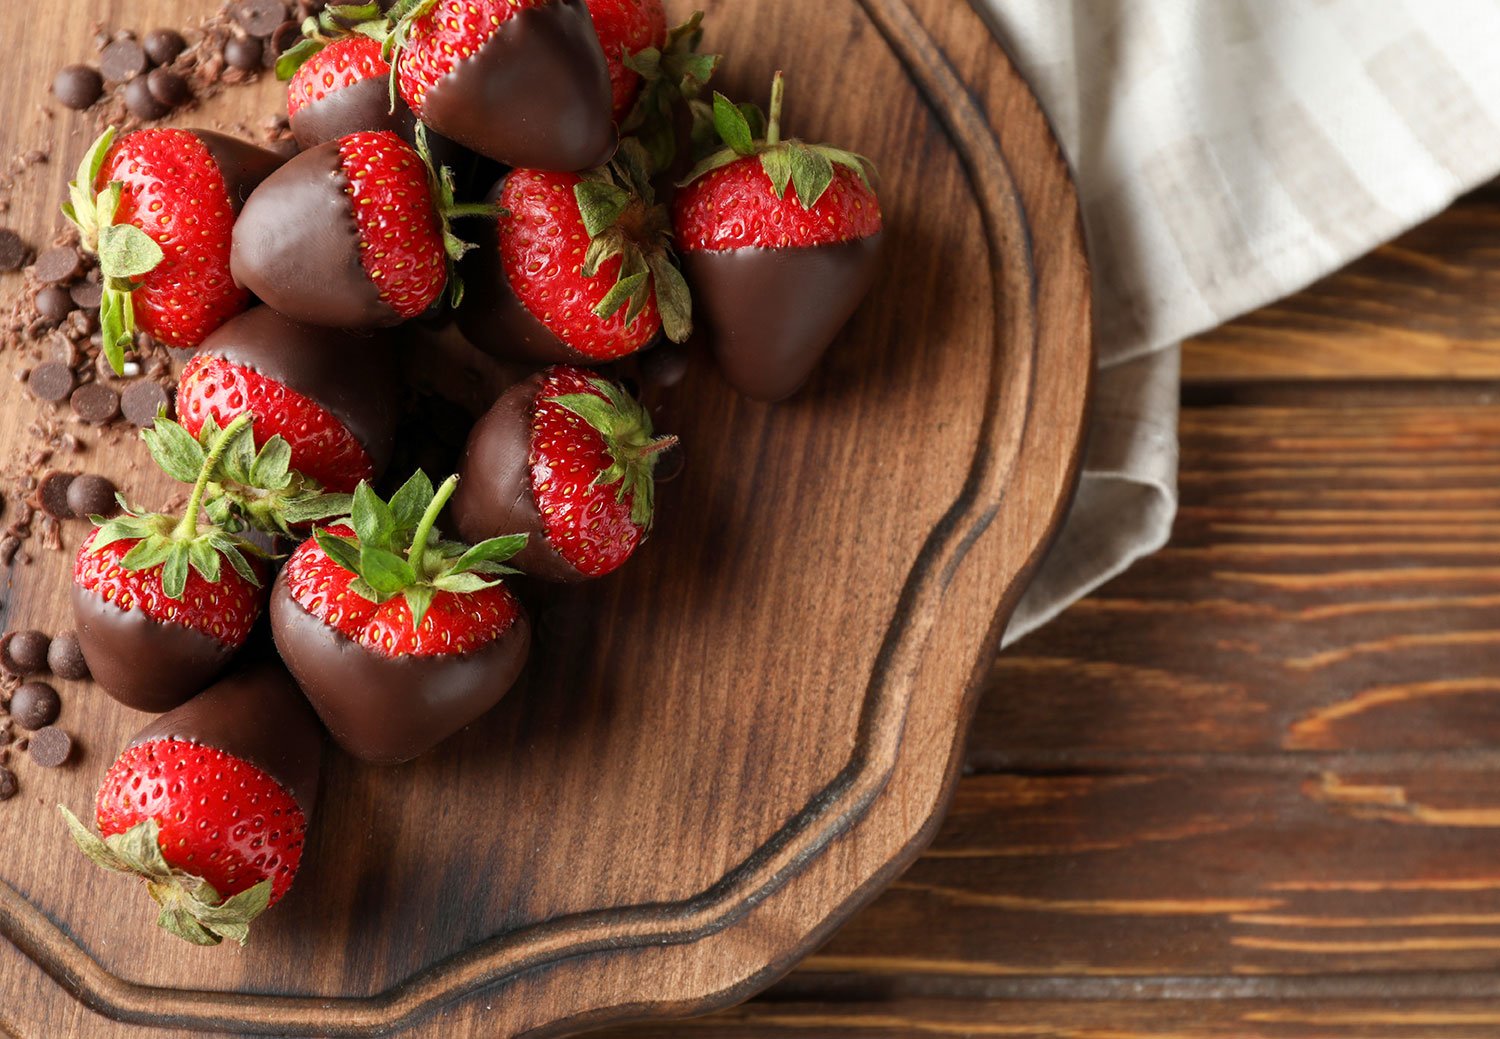 Board With Tasty Chocolate Dipped Strawberries On Wooden Table